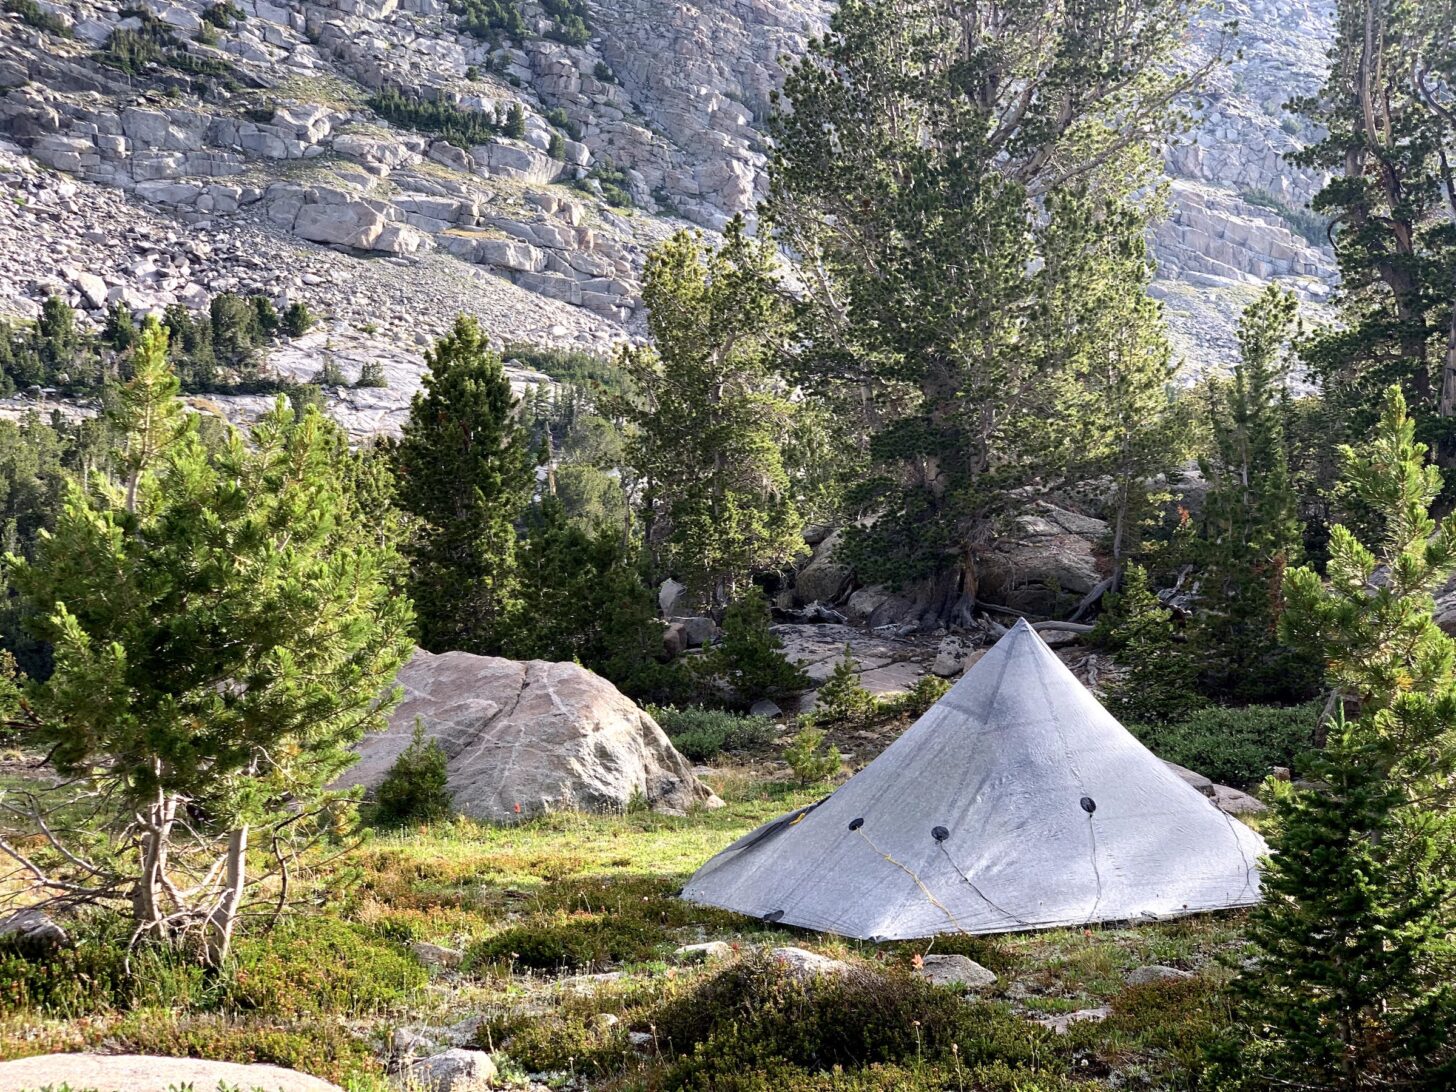 A landscape where using an Ursack is an ideal food storage option. Near the whitebark-pine treeline of a mountainous alpine area in Wyoming, where limbs for hanging a bear bag are limited, but small-diameter trees are plentiful. Photo: Ryan Jordan.